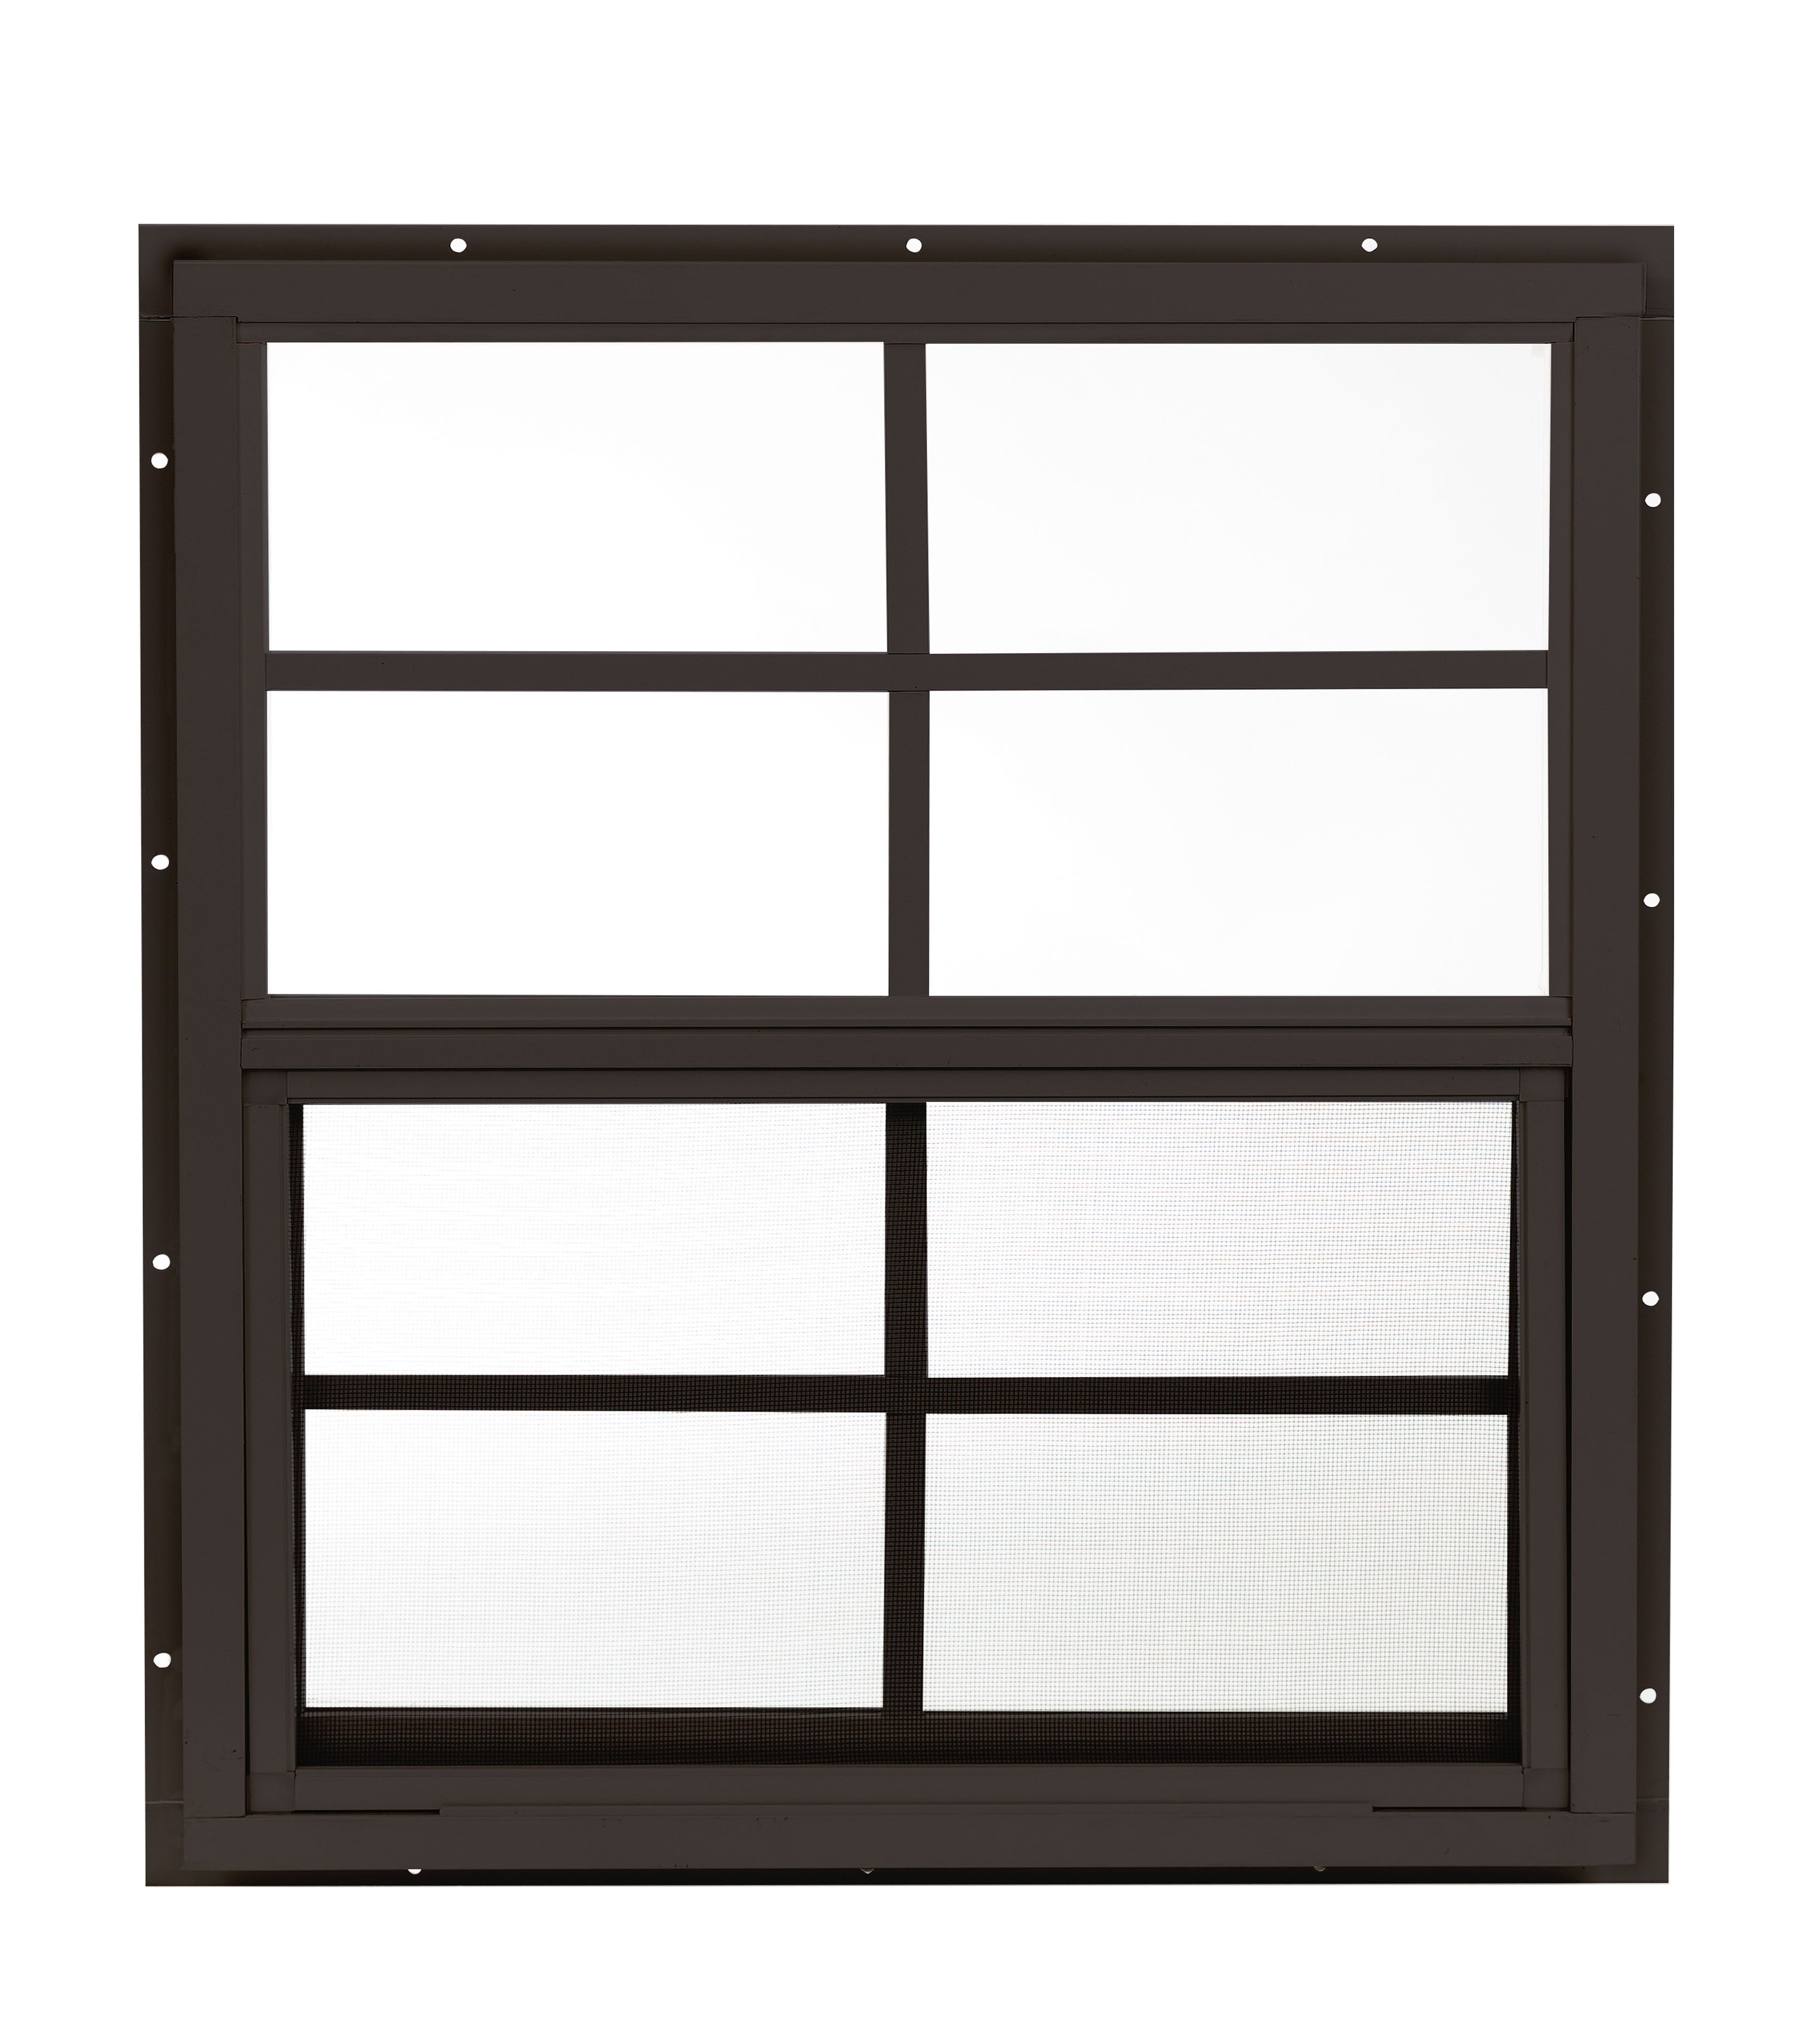 24" W x 27" H Single Hung J-Lap Mount Window  with 4 Grids for Sheds, Playhouses, and MORE